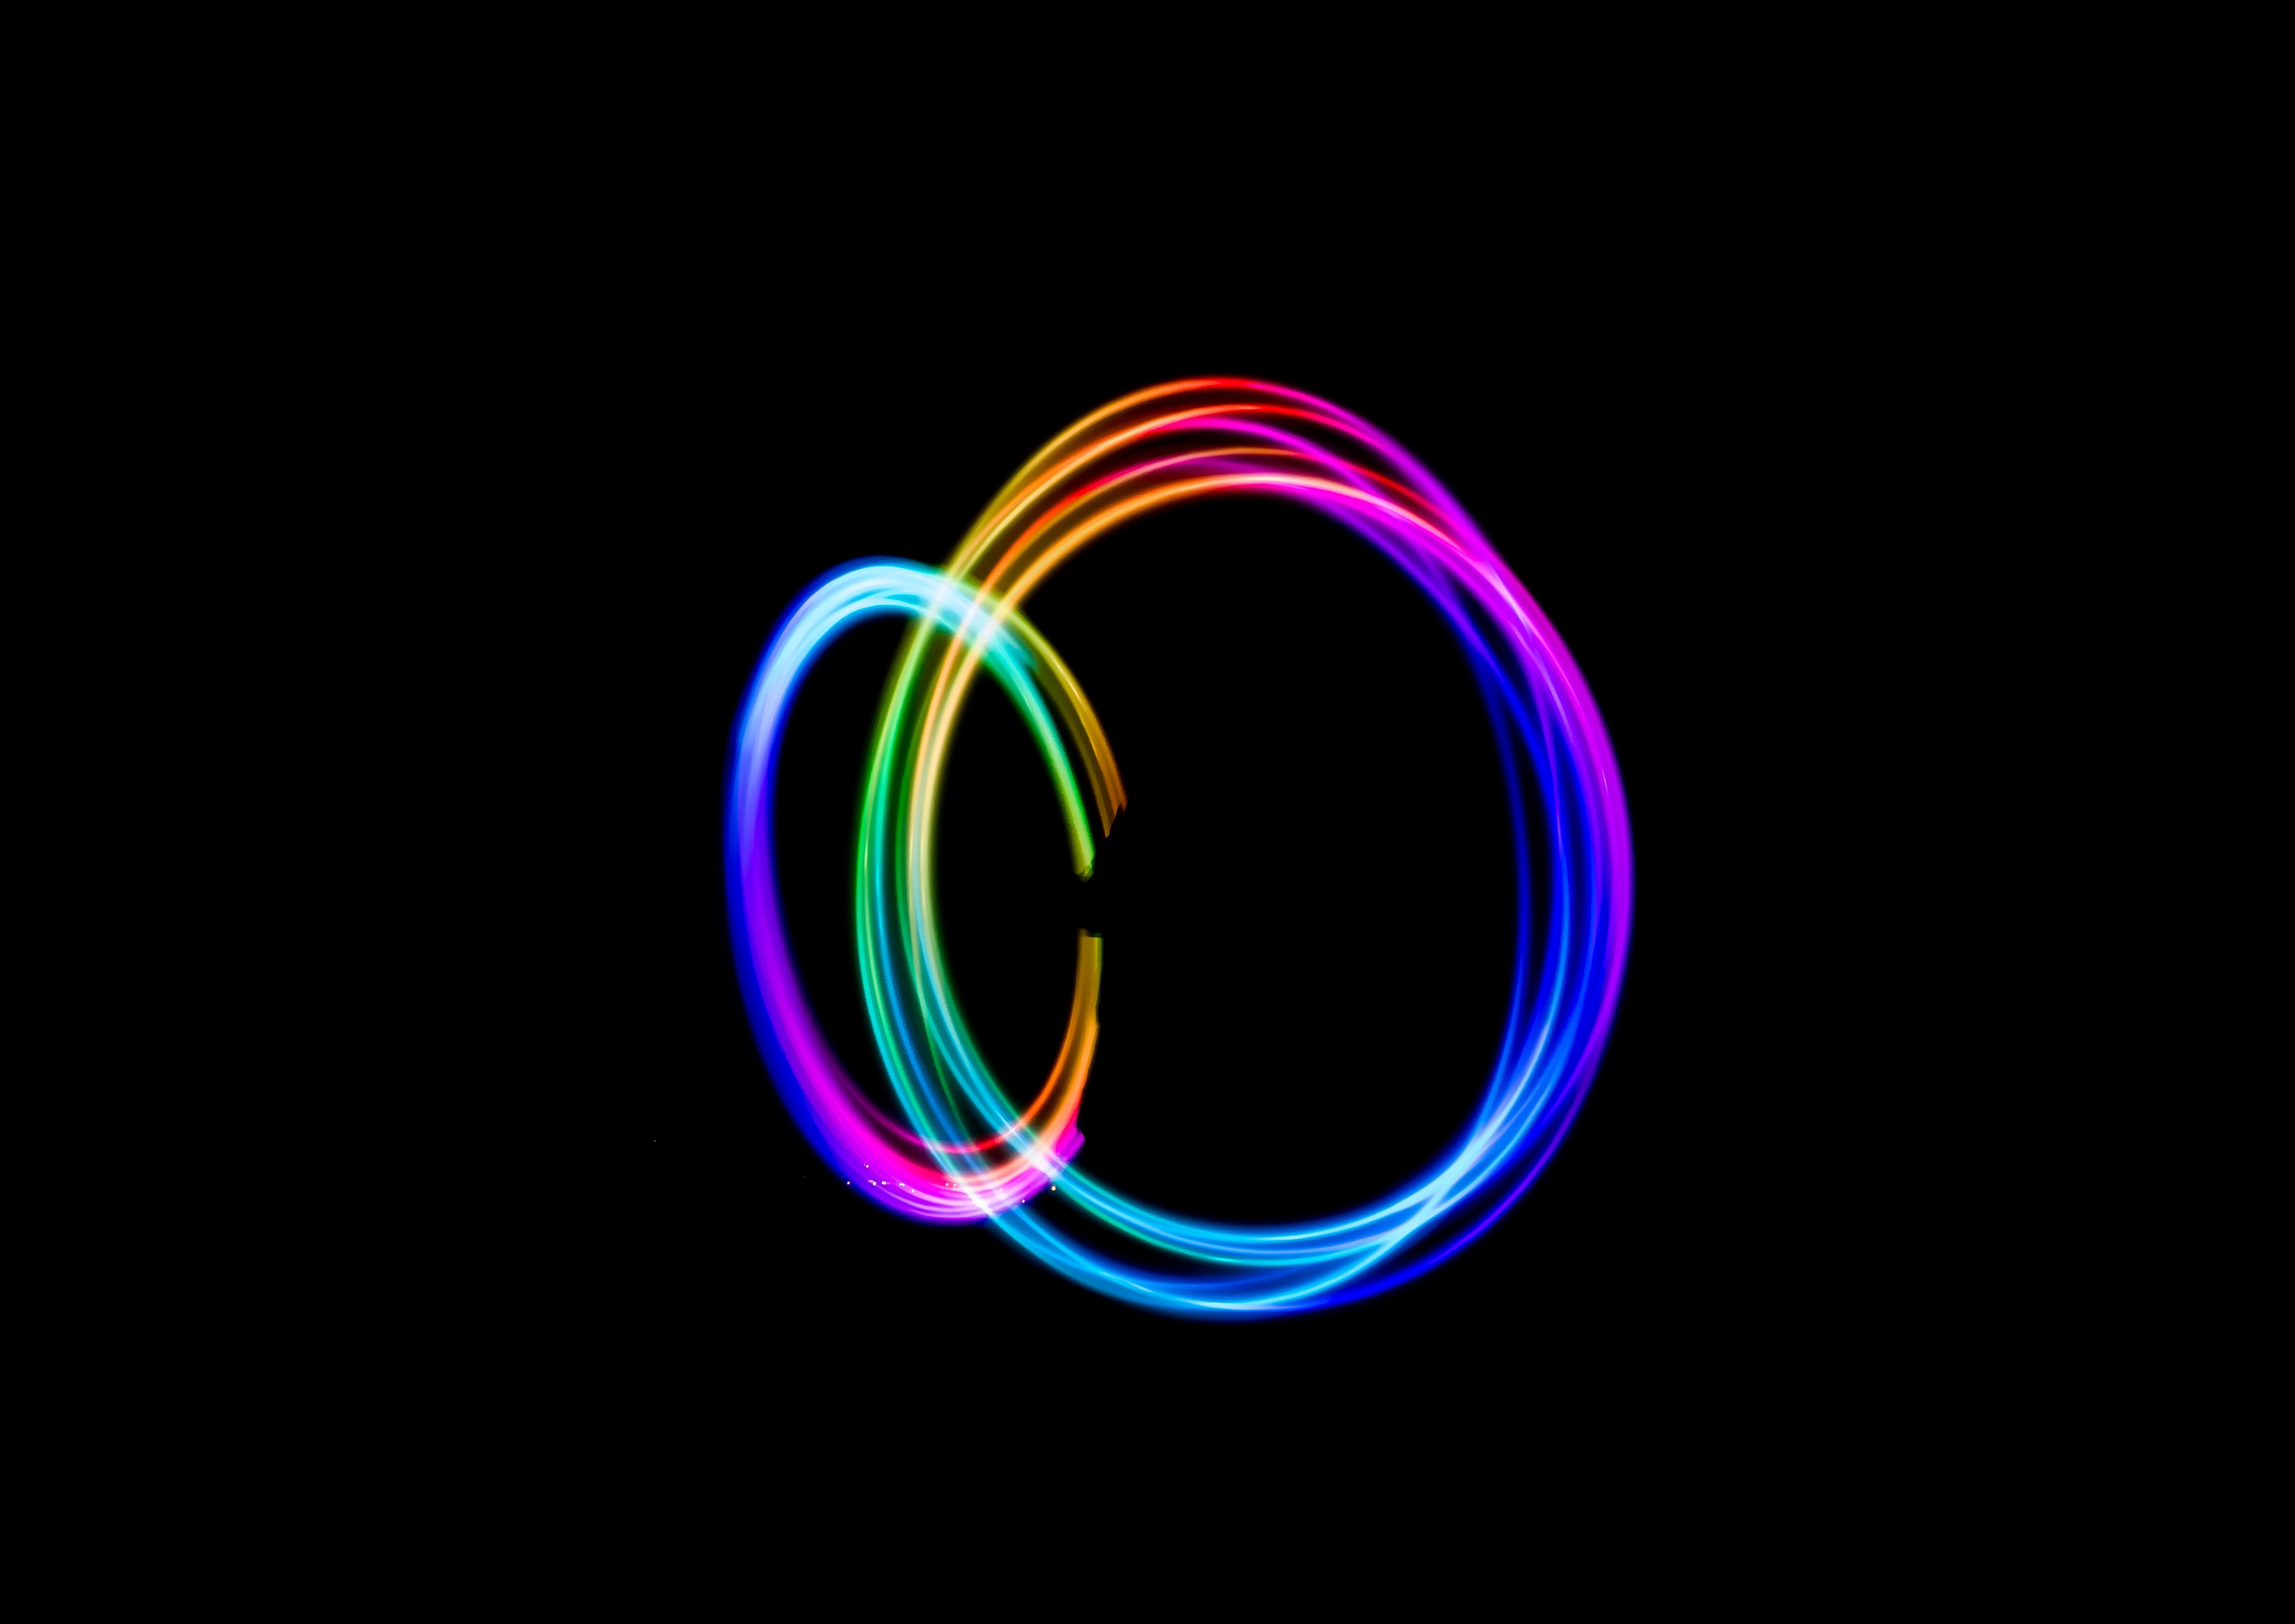 long exposure, Circle, Colorful, Minimalism, Simple background, Black background Wallpaper